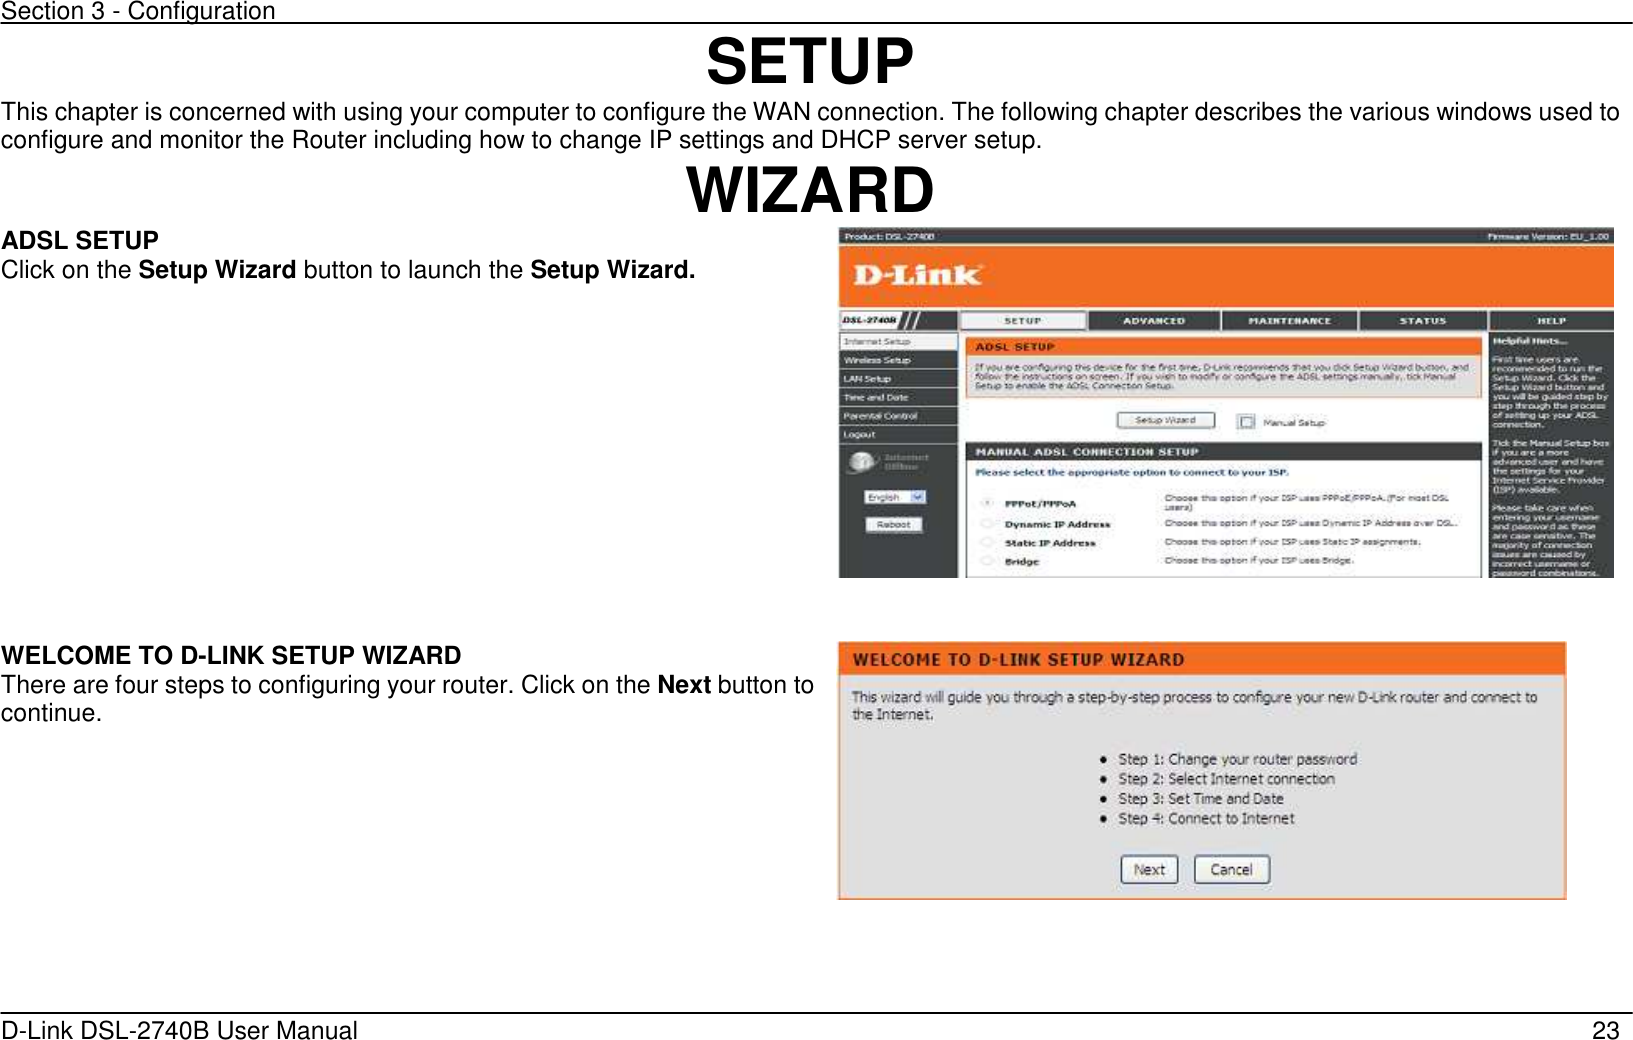 Section 3 - Configuration   D-Link DSL-2740B User Manual                                                  23 SETUP This chapter is concerned with using your computer to configure the WAN connection. The following chapter describes the various windows used to configure and monitor the Router including how to change IP settings and DHCP server setup. WIZARD ADSL SETUP Click on the Setup Wizard button to launch the Setup Wizard.     WELCOME TO D-LINK SETUP WIZARD There are four steps to configuring your router. Click on the Next button to continue.  